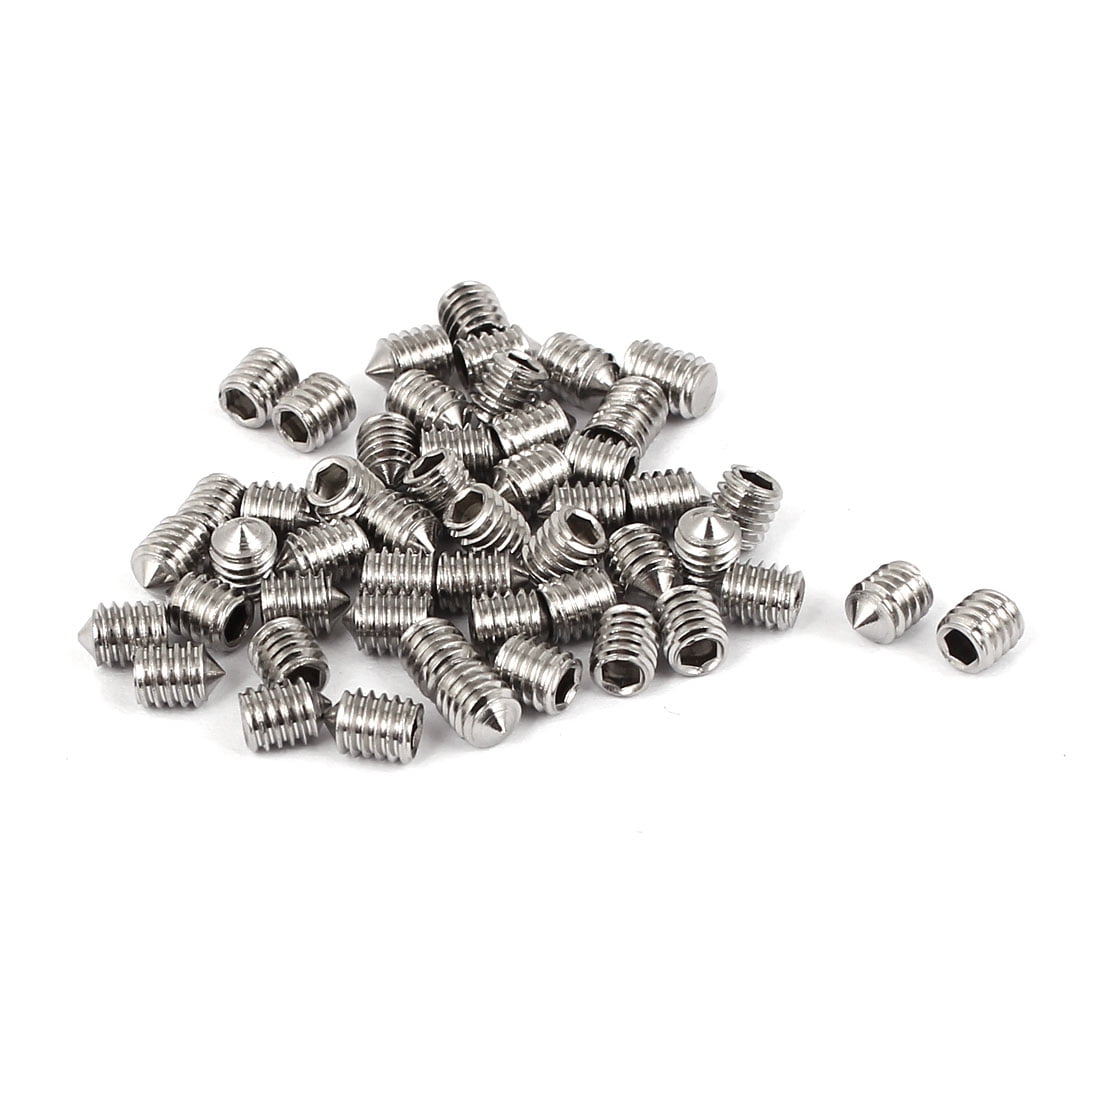 Stainless 50 Pcs M4 Screw Nuts 